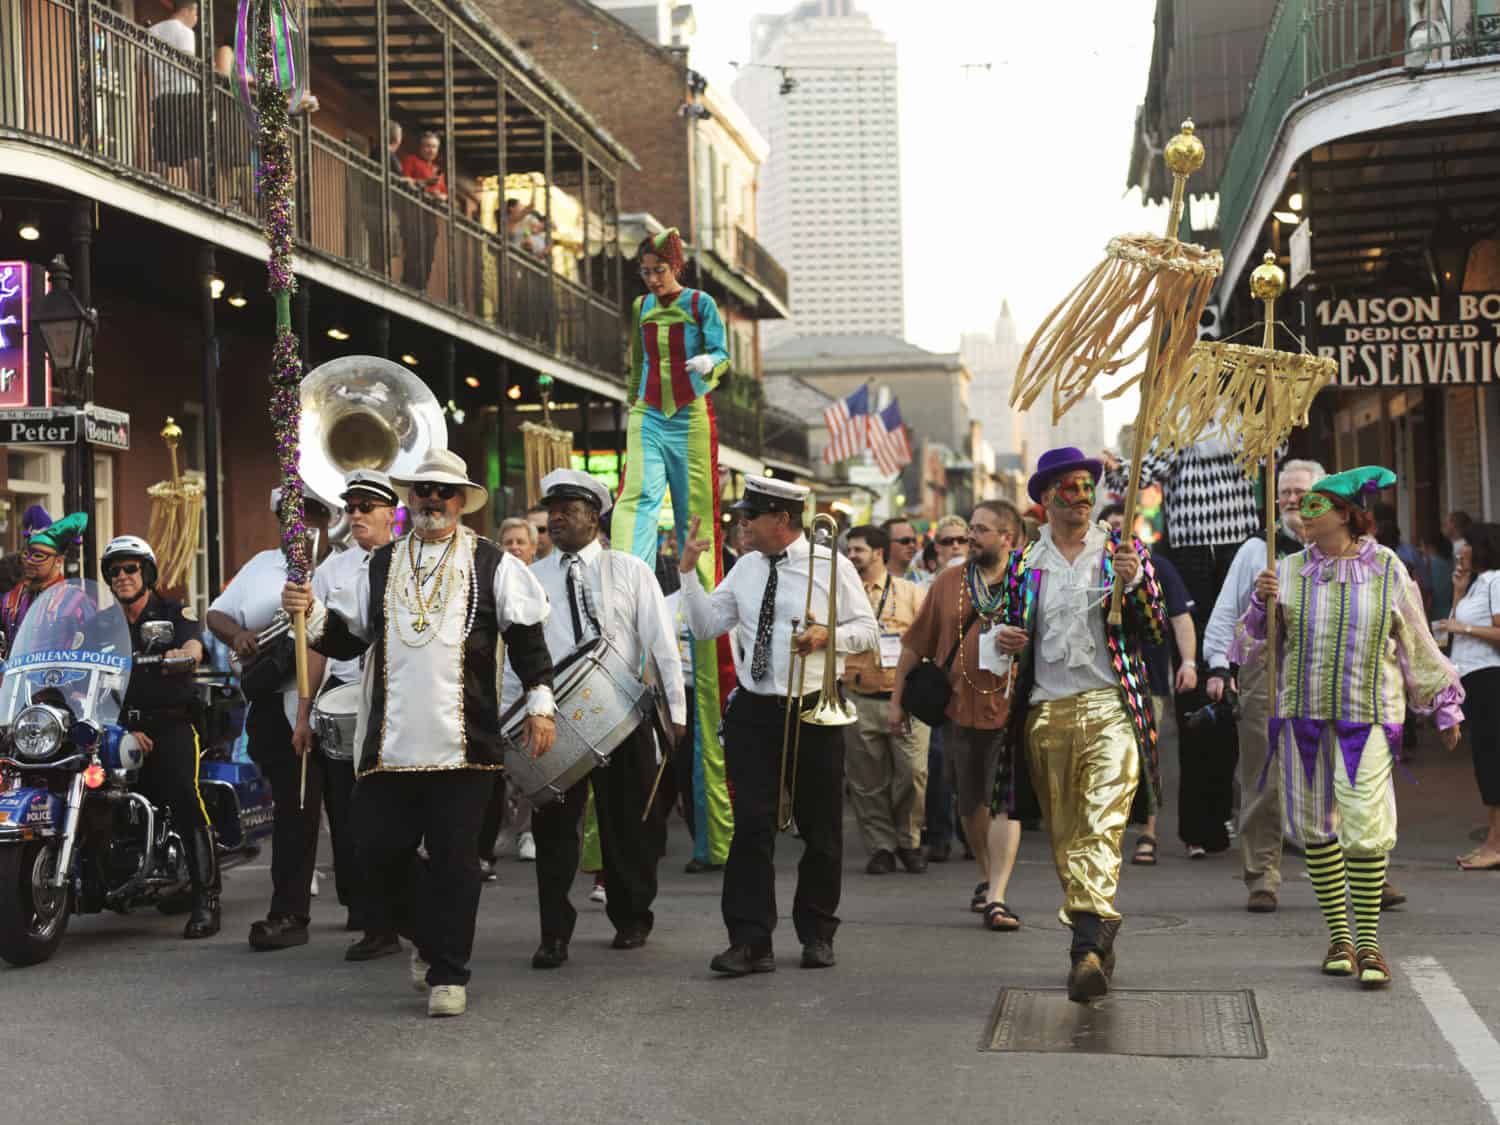 People walking in a parade in New Orleans, led by musicians and people in costumes